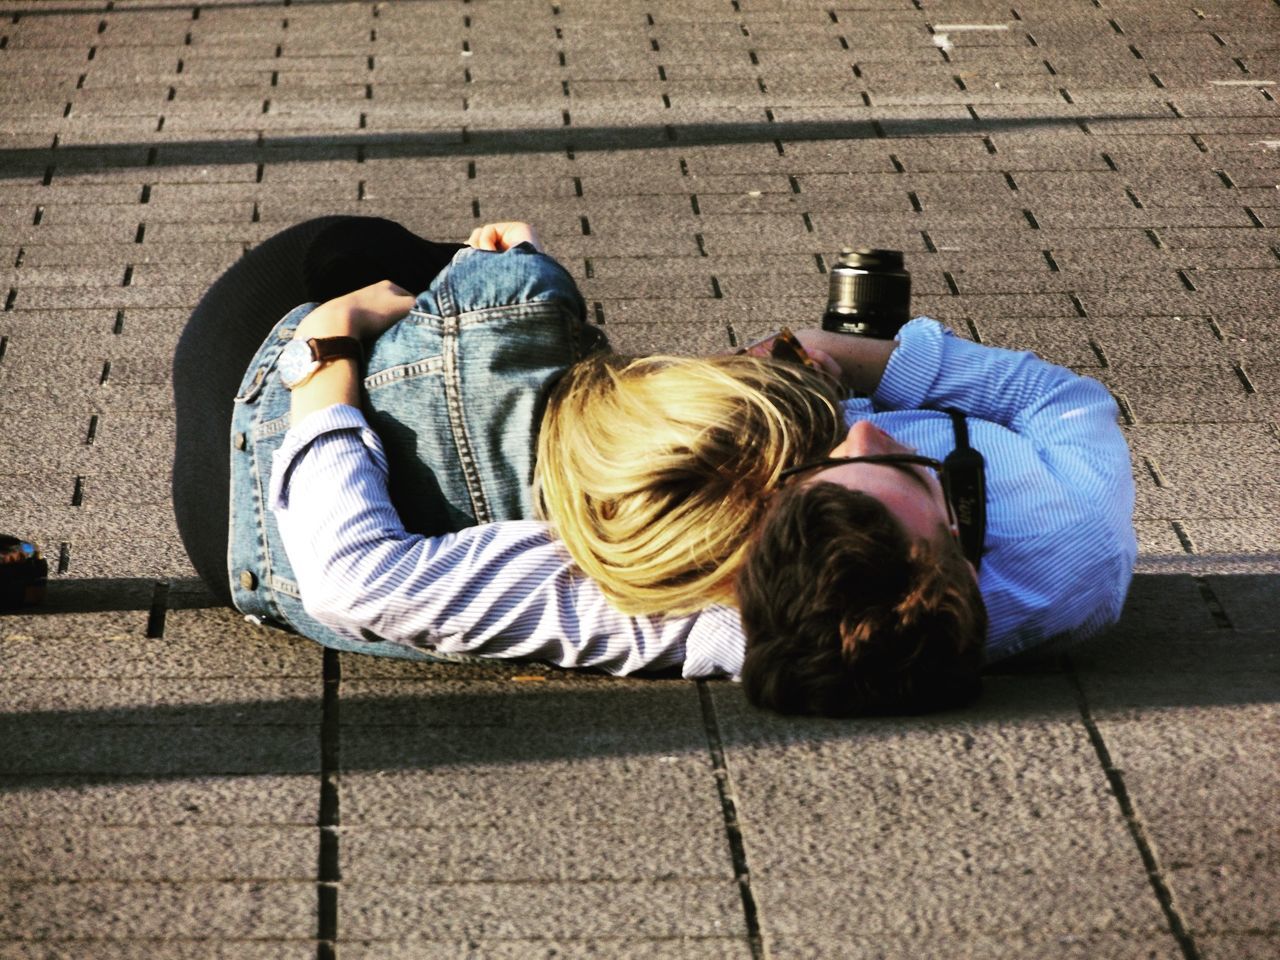 two people, lying down, heterosexual couple, outdoors, togetherness, real people, leisure activity, high angle view, couple - relationship, lifestyles, day, casual clothing, men, women, bonding, relaxation, young women, young adult, friendship, adult, people, adults only